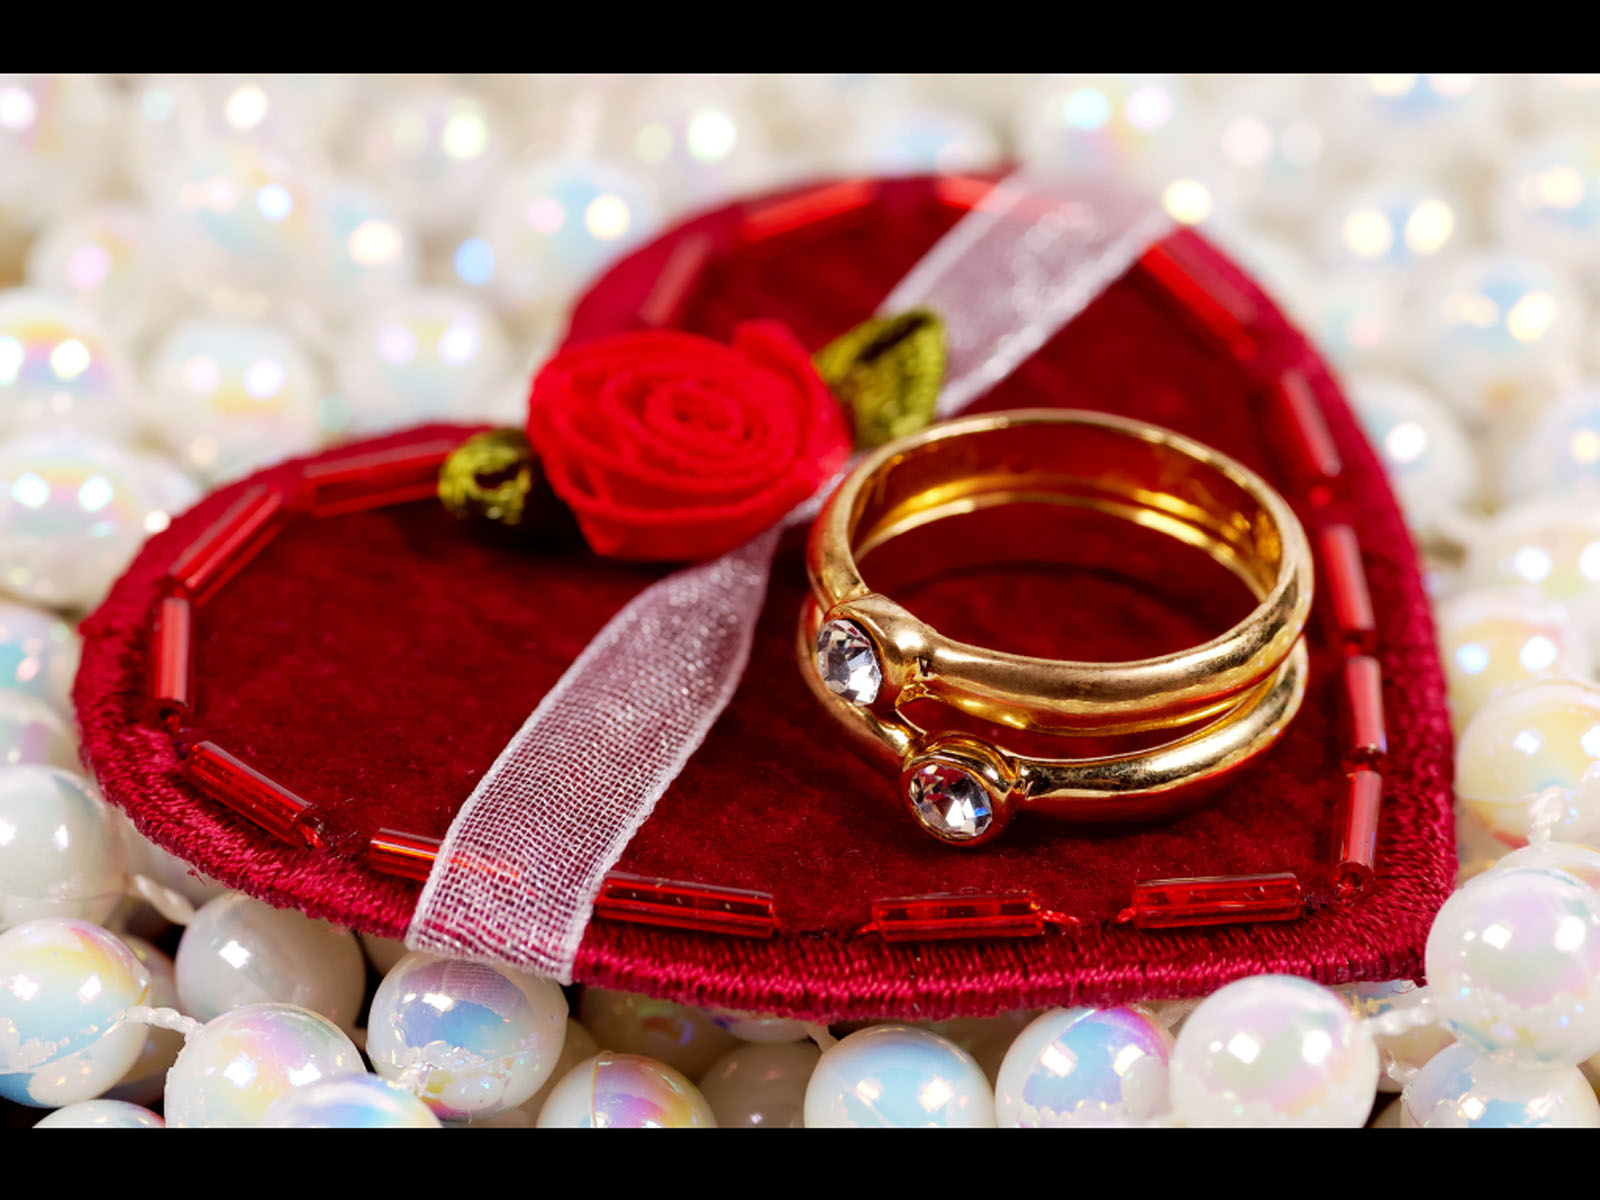 Propose day gifts when properly selected can impress the lover